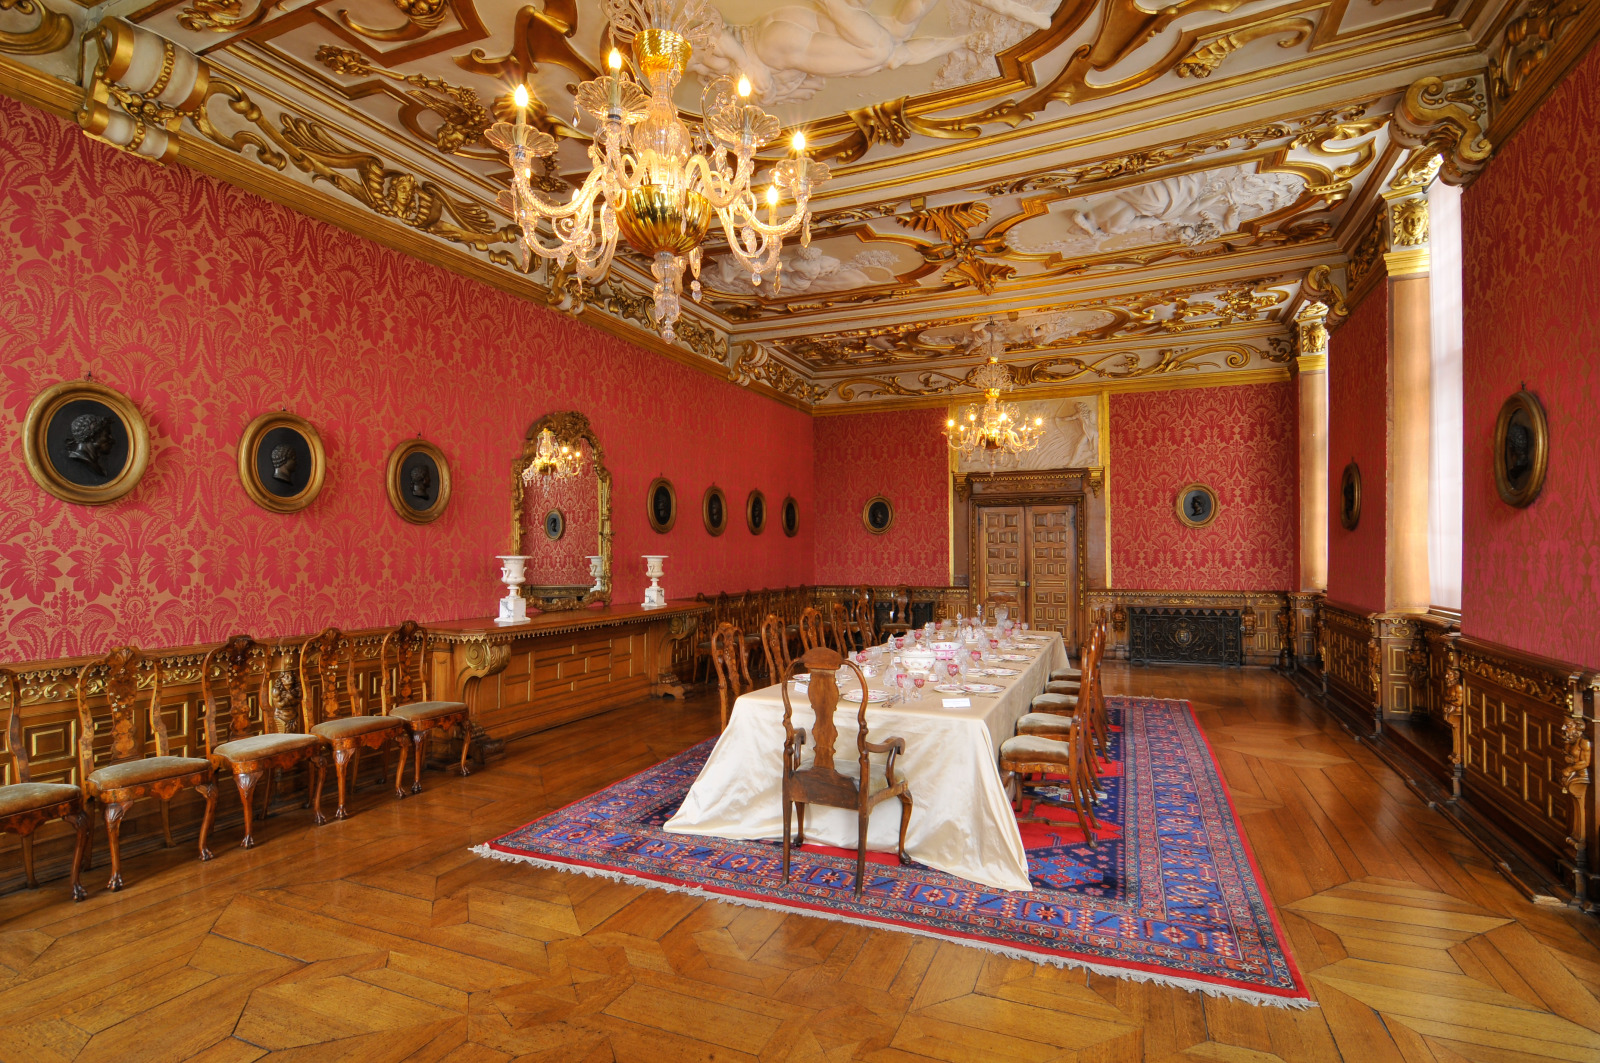 The Château de Modave dining room, the table dressed